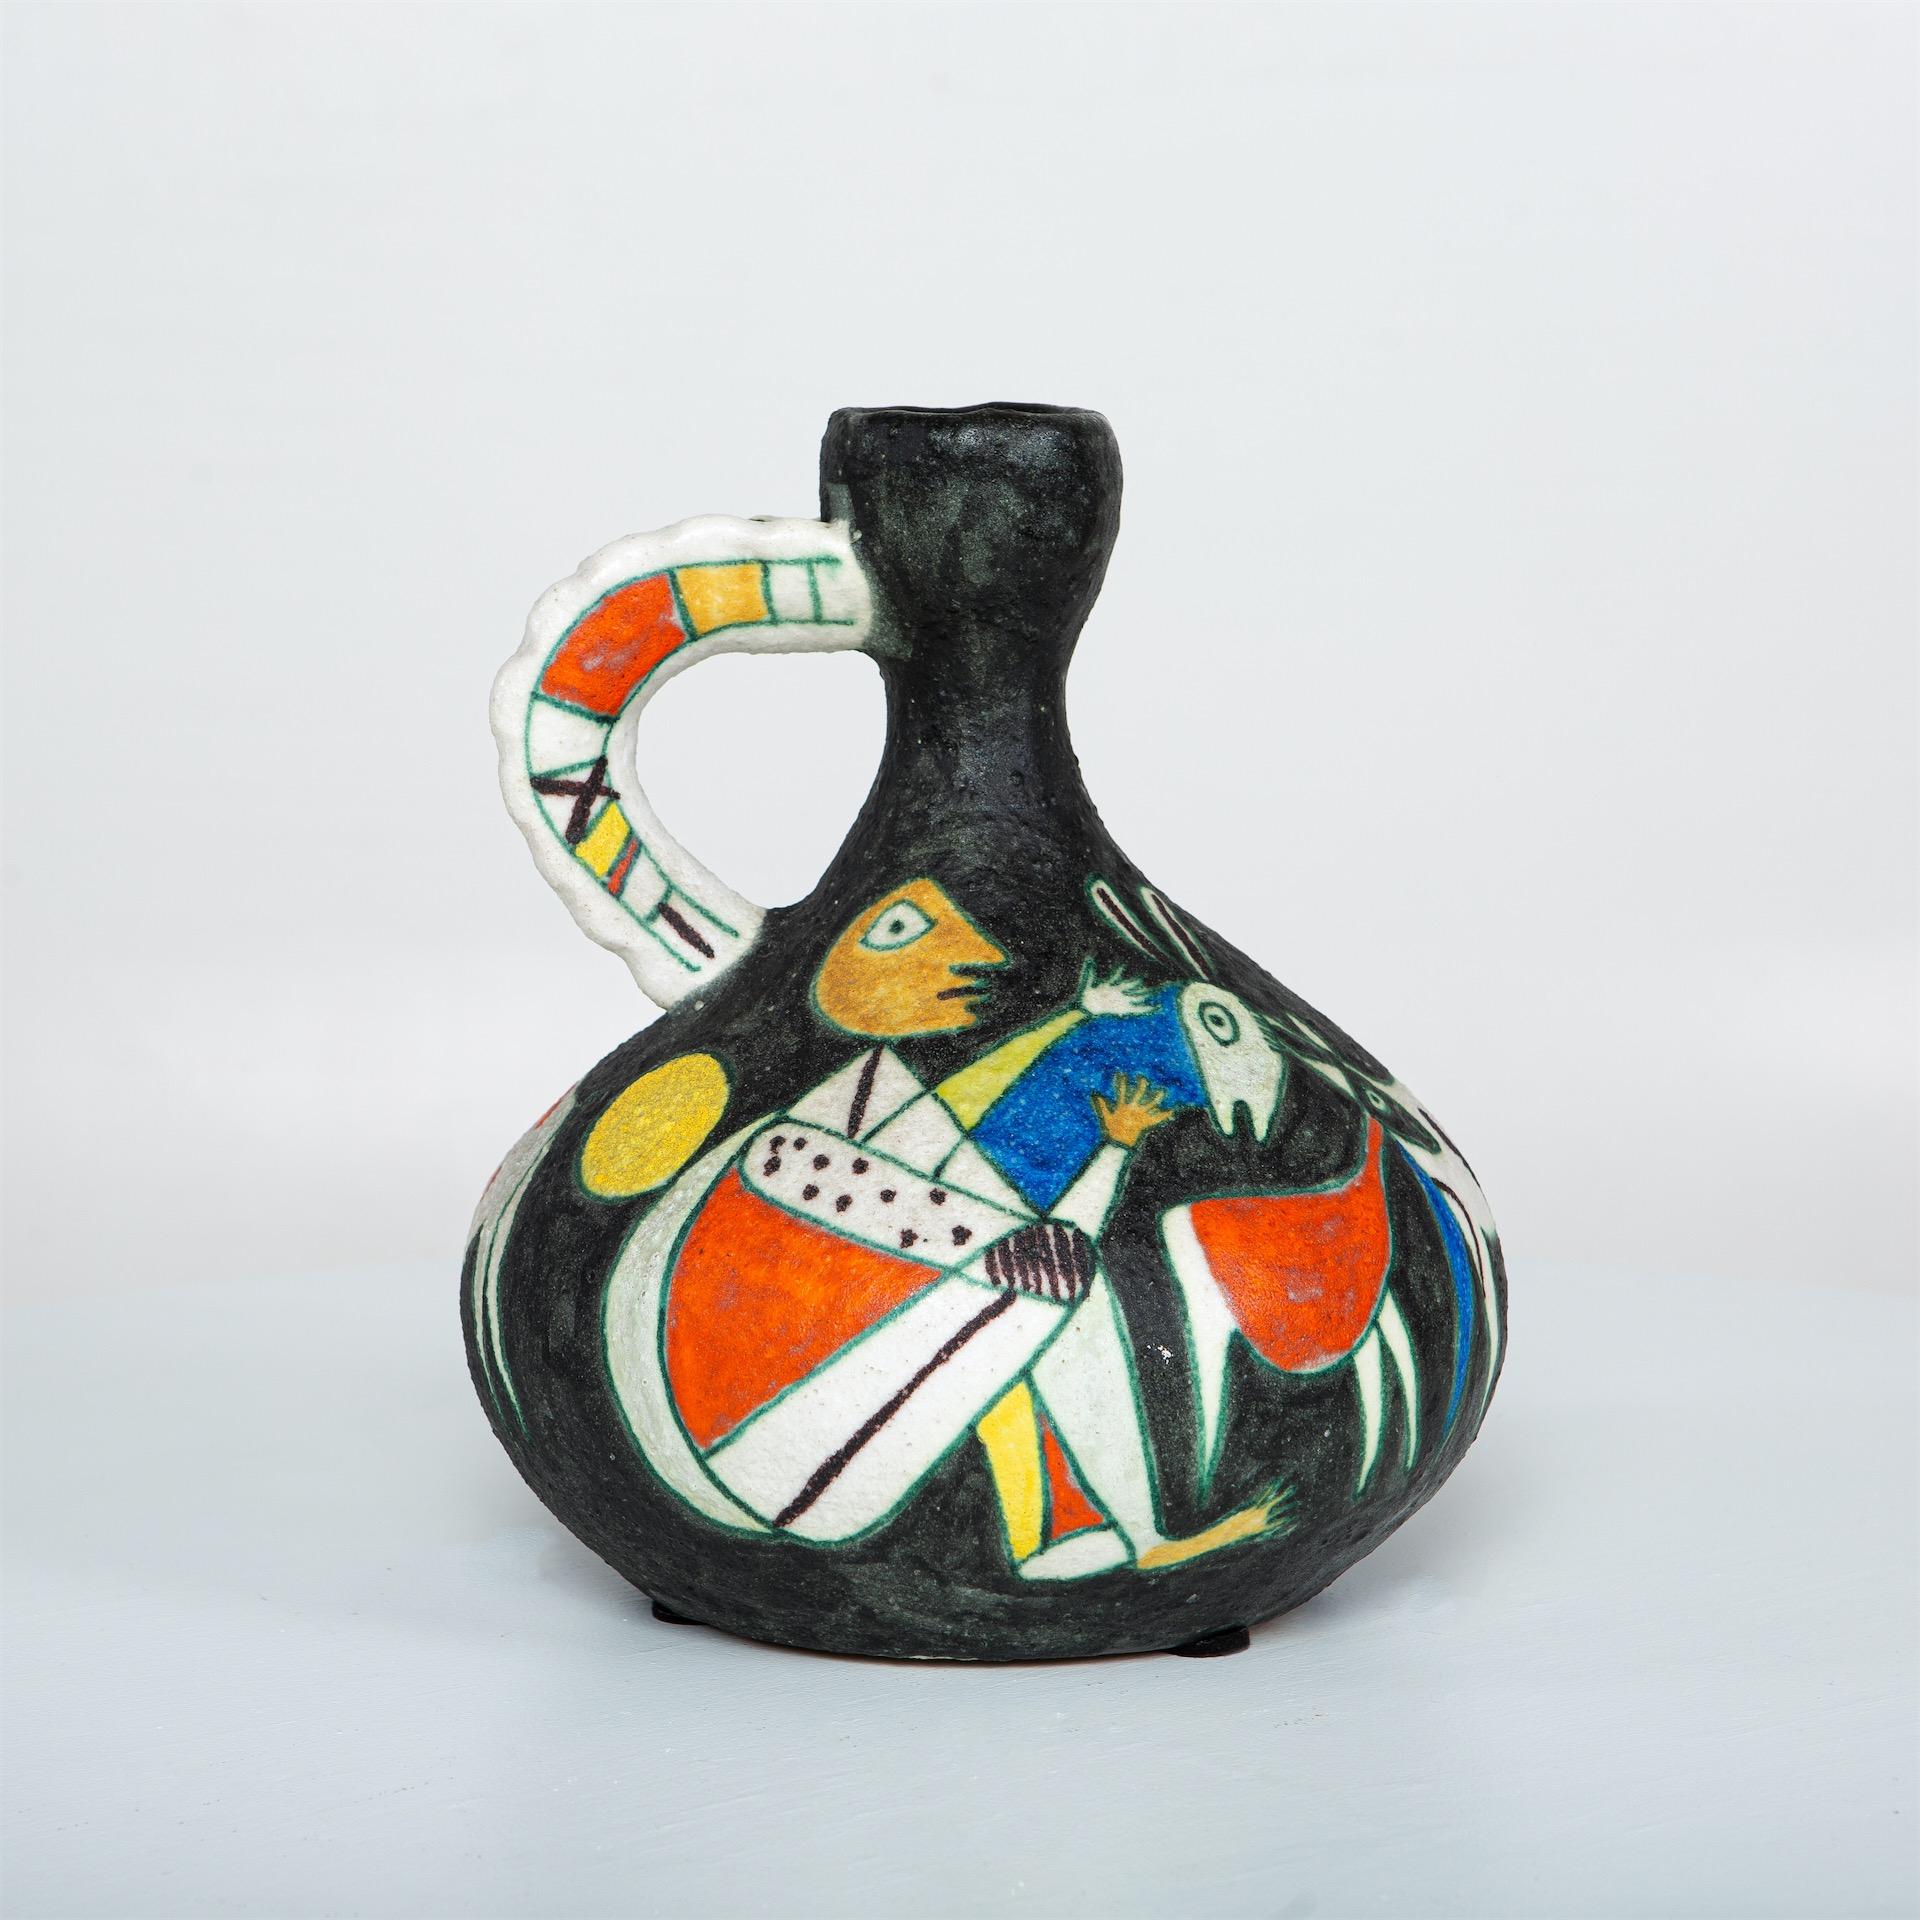 Large heavy carafe in polychrome glazed ceramic with handle and potbellied wall by Guido Gambone. The wall shows cubistic abstract people and animals in primary colors on a black background.